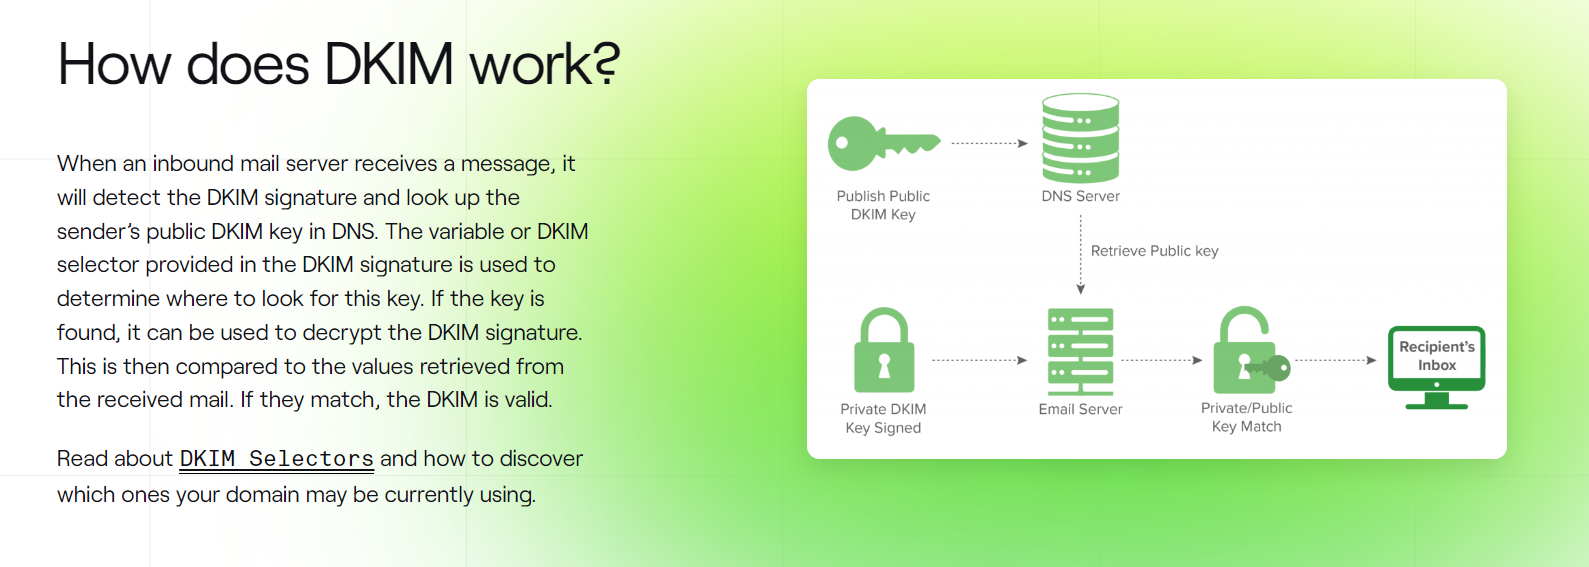 how does dkim work